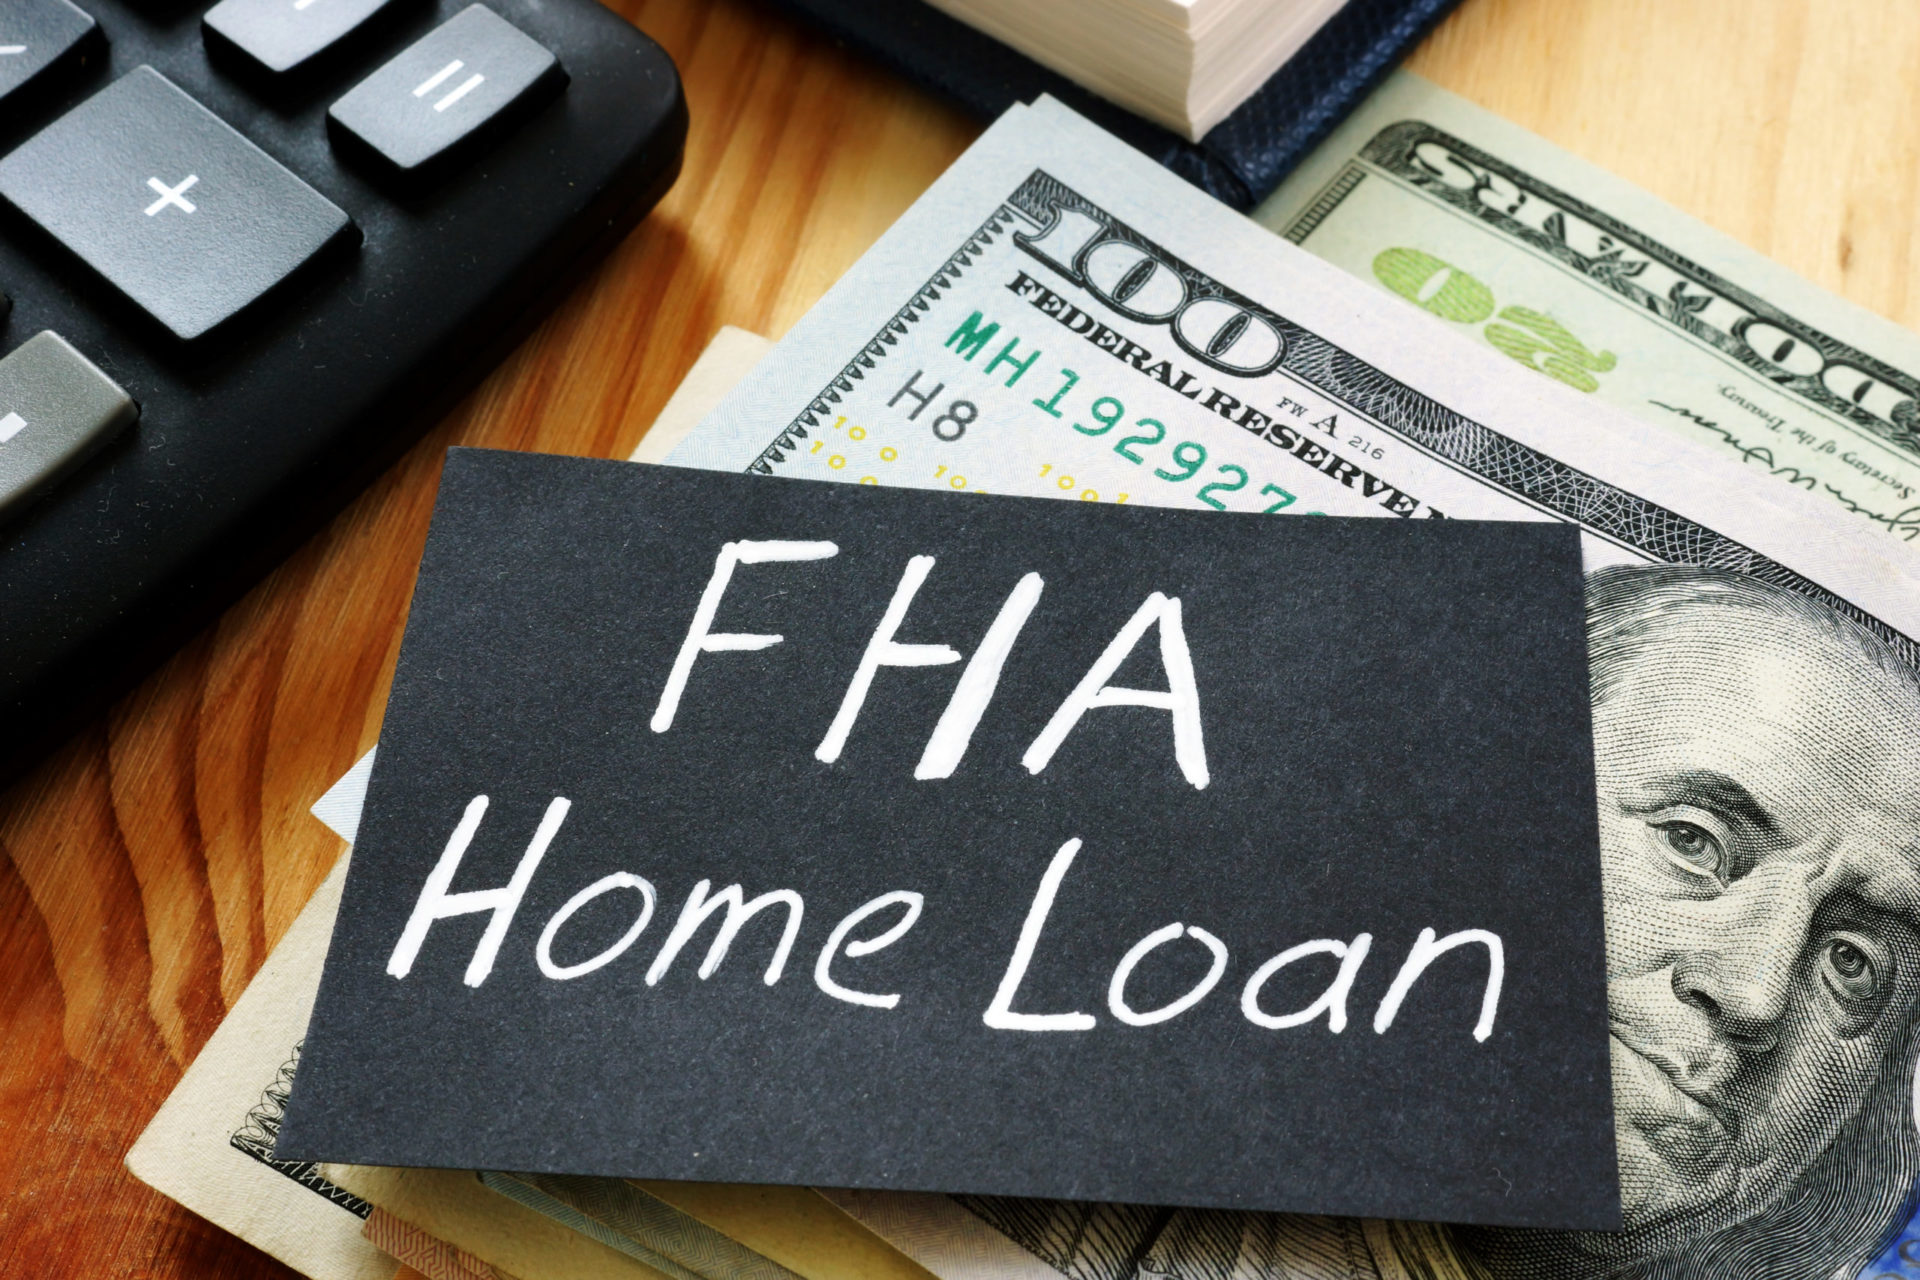 Text sign showing hand written words FHA Home loan